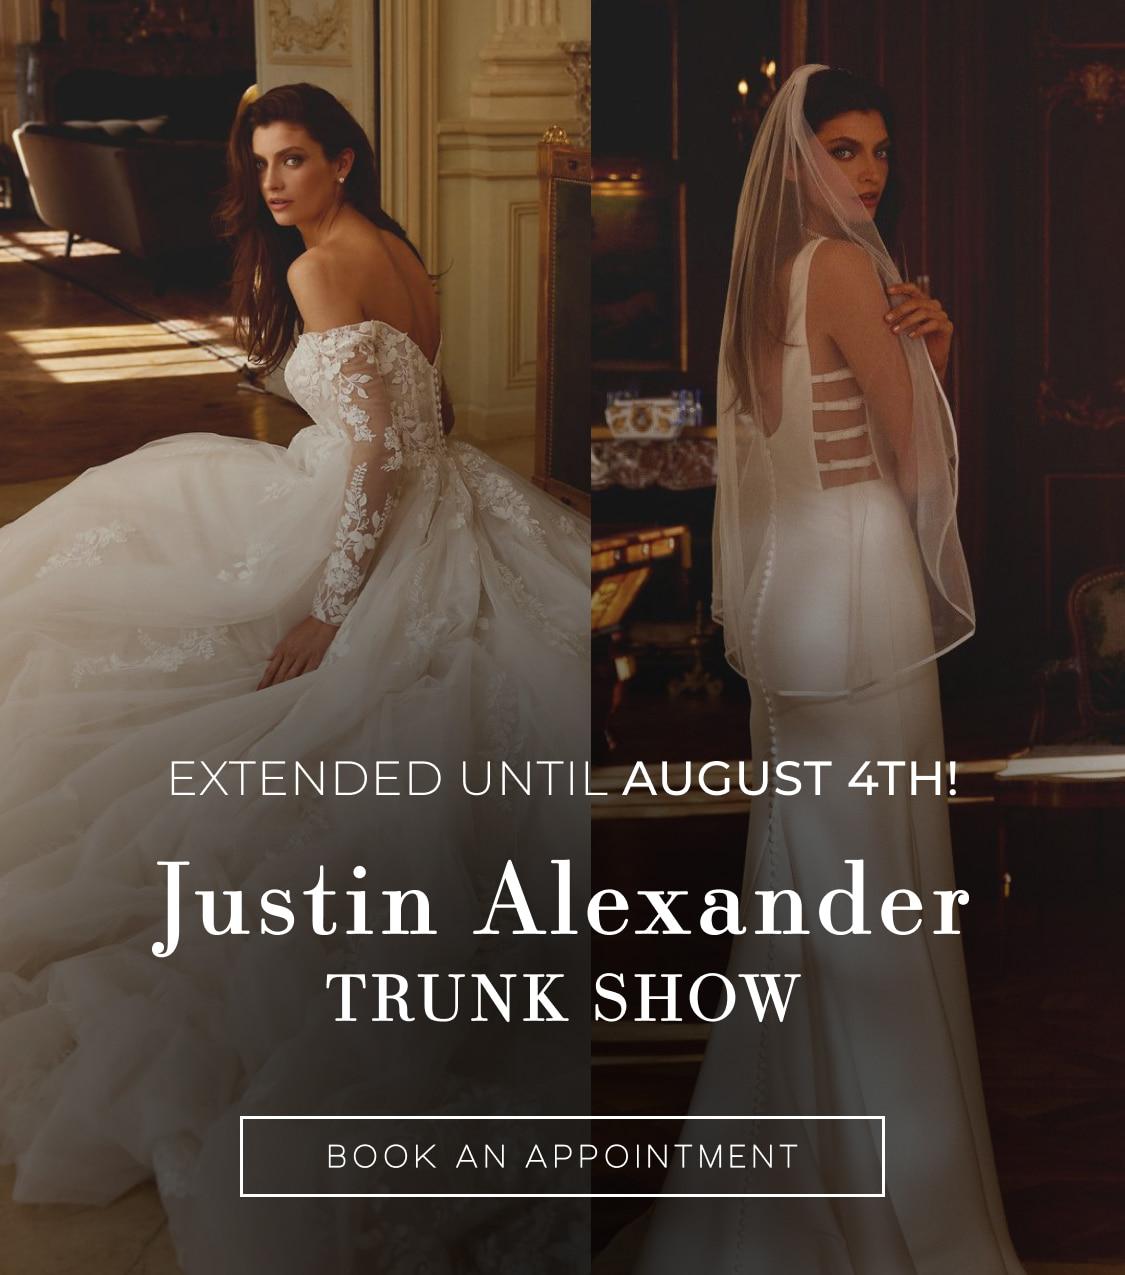 Justin Alexander Trunk Show August 4th - banner for mobile